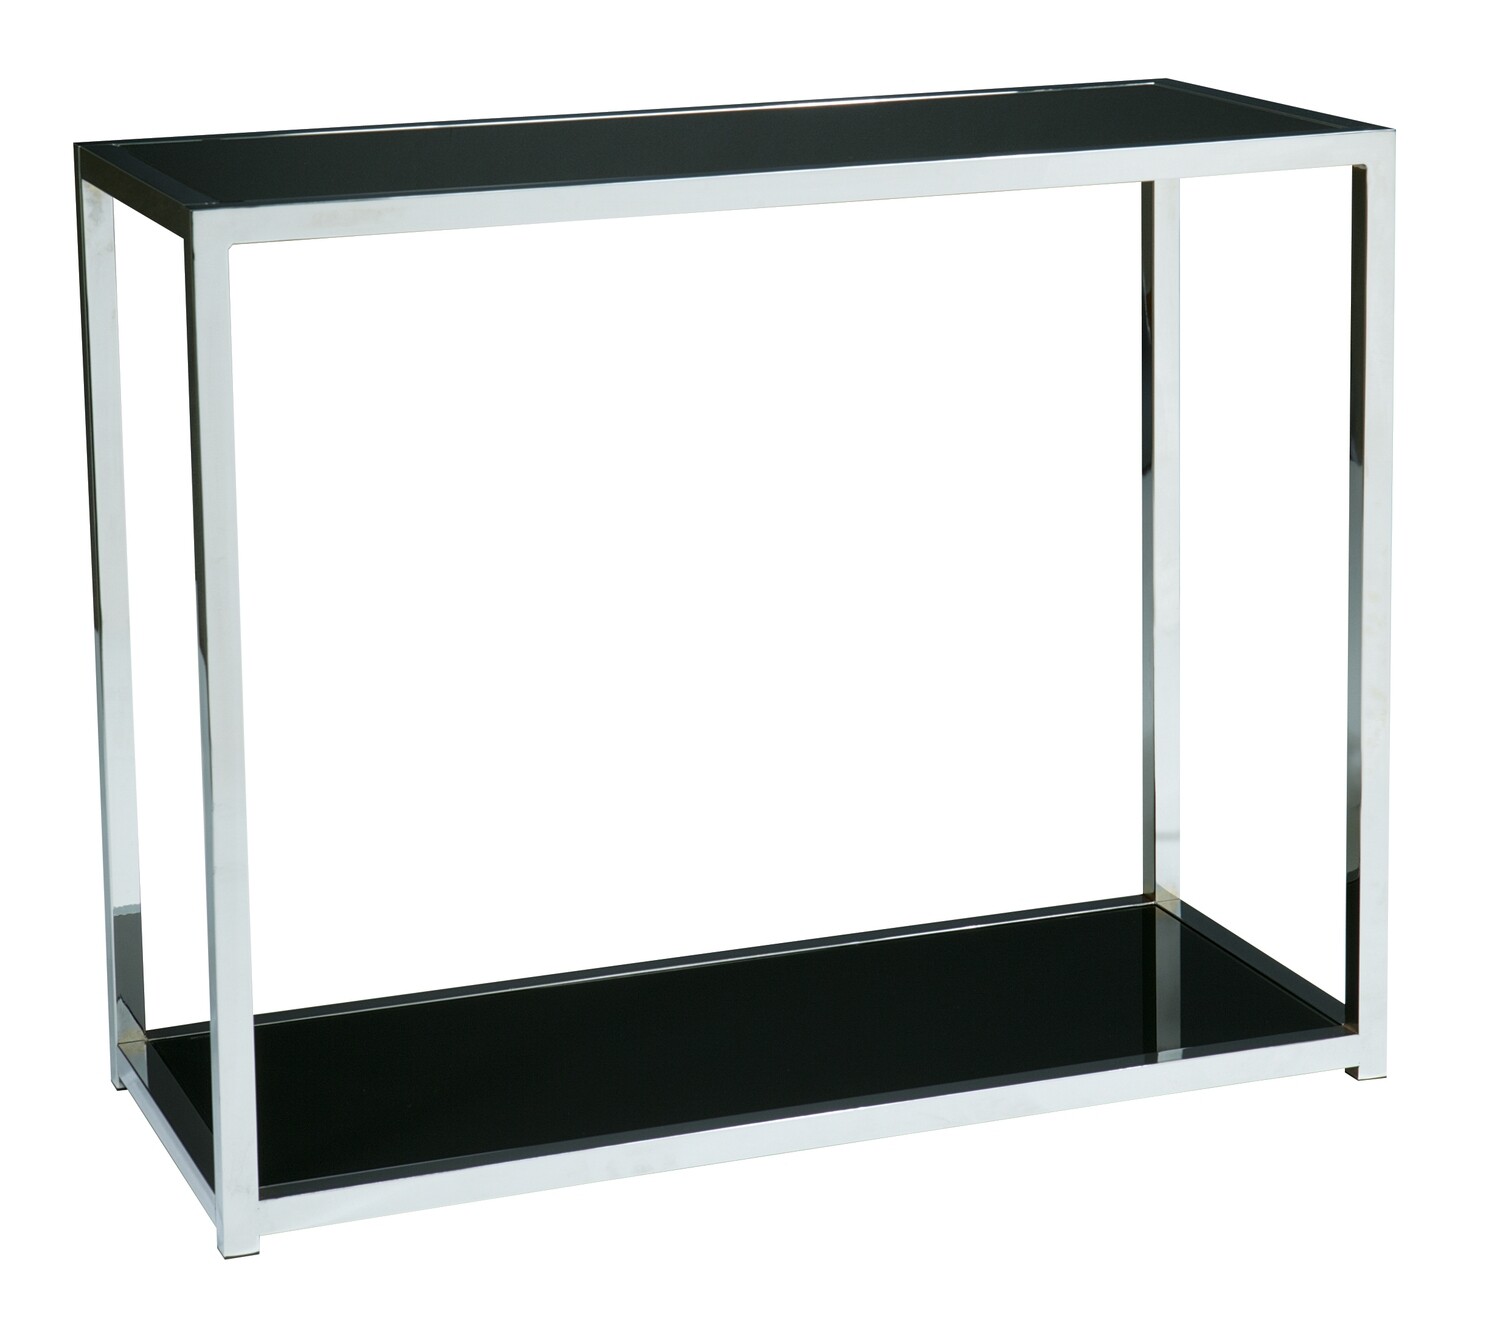 Yield Foyer/Sofa Table with Chrome Frame and Black Glass Top